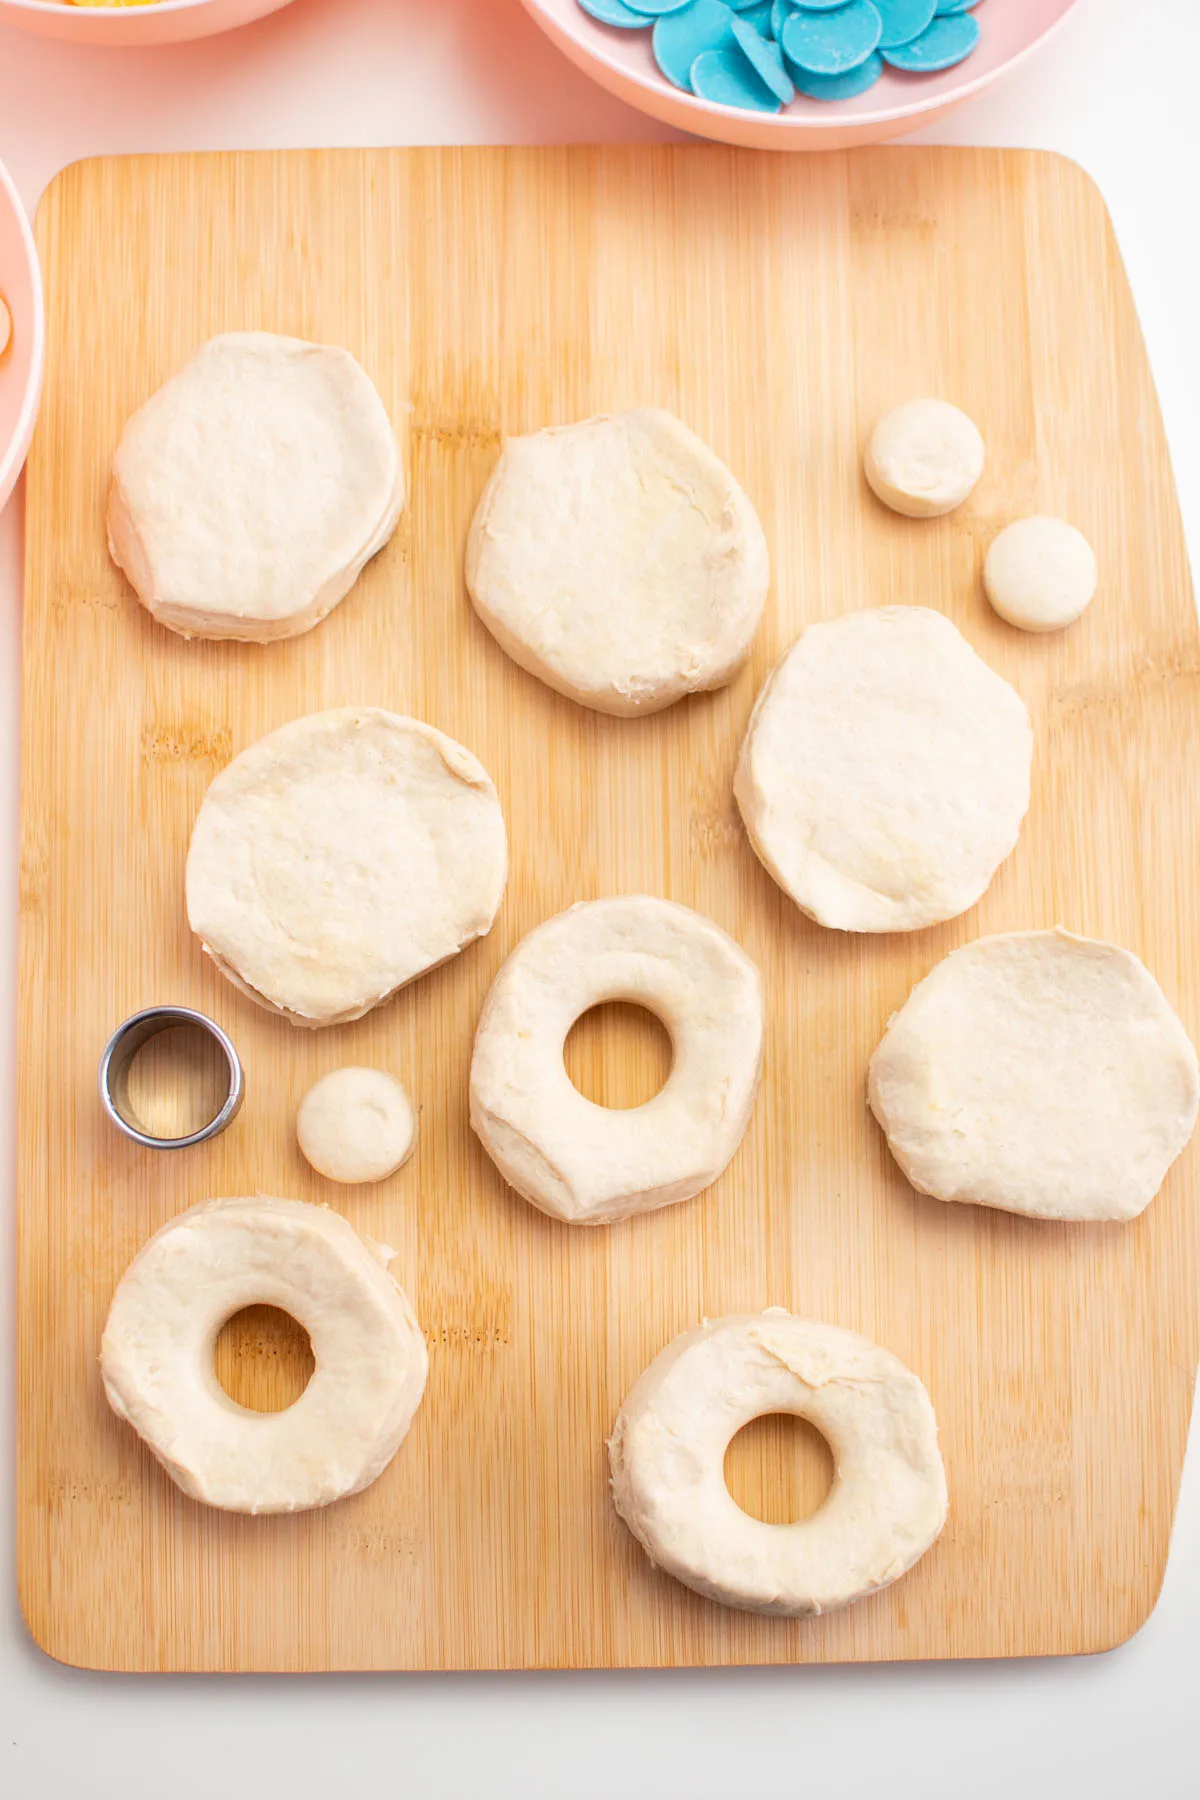 Raw biscuit dough circles with hole cut of center on wood cutting board.